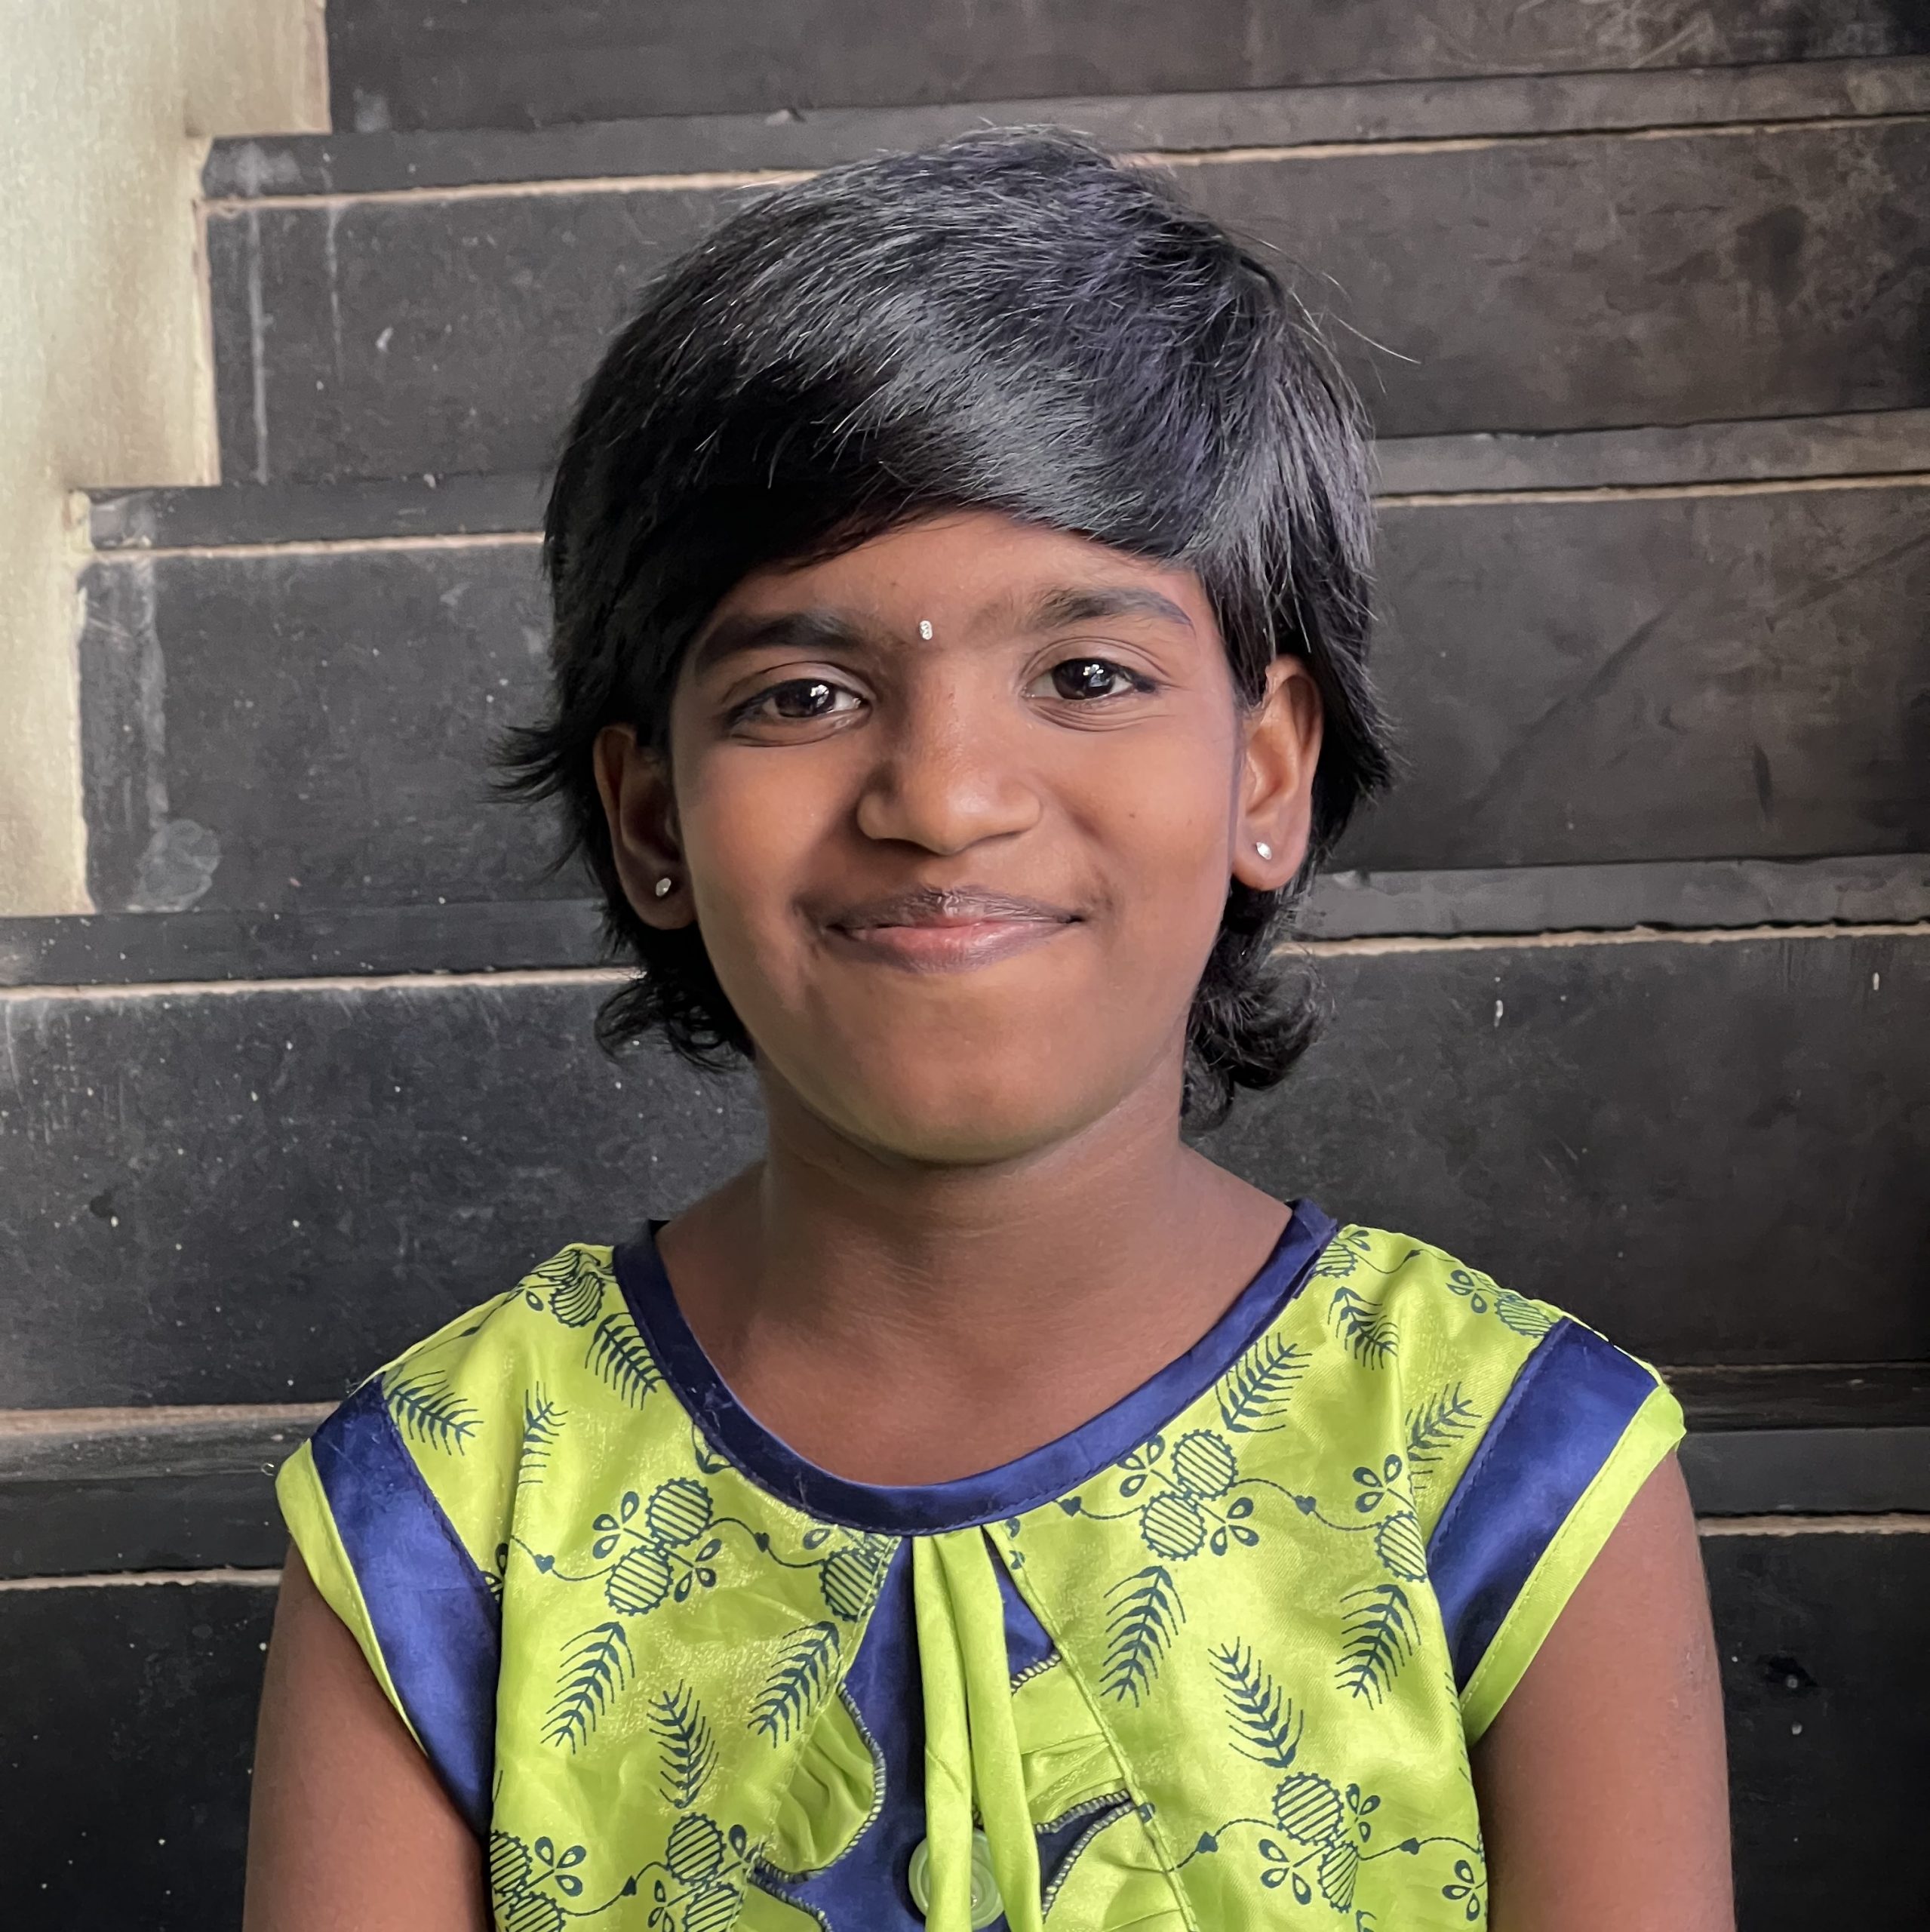 Gurramvyshanavi who is a resident of Kurnool district joined SERUDS in 2015. Her father Thirumalesh who works at a construction site joined her at Joy home SERUDS. Vyshanvi’s mother Adi Lakshmi is sick and is not able to take care of her children . Her father often has to work on construction sites which are in different states because of which he is not able to help and take care of his children. Because of this he joined vyshanvi and her sister Revathi at SERUDS